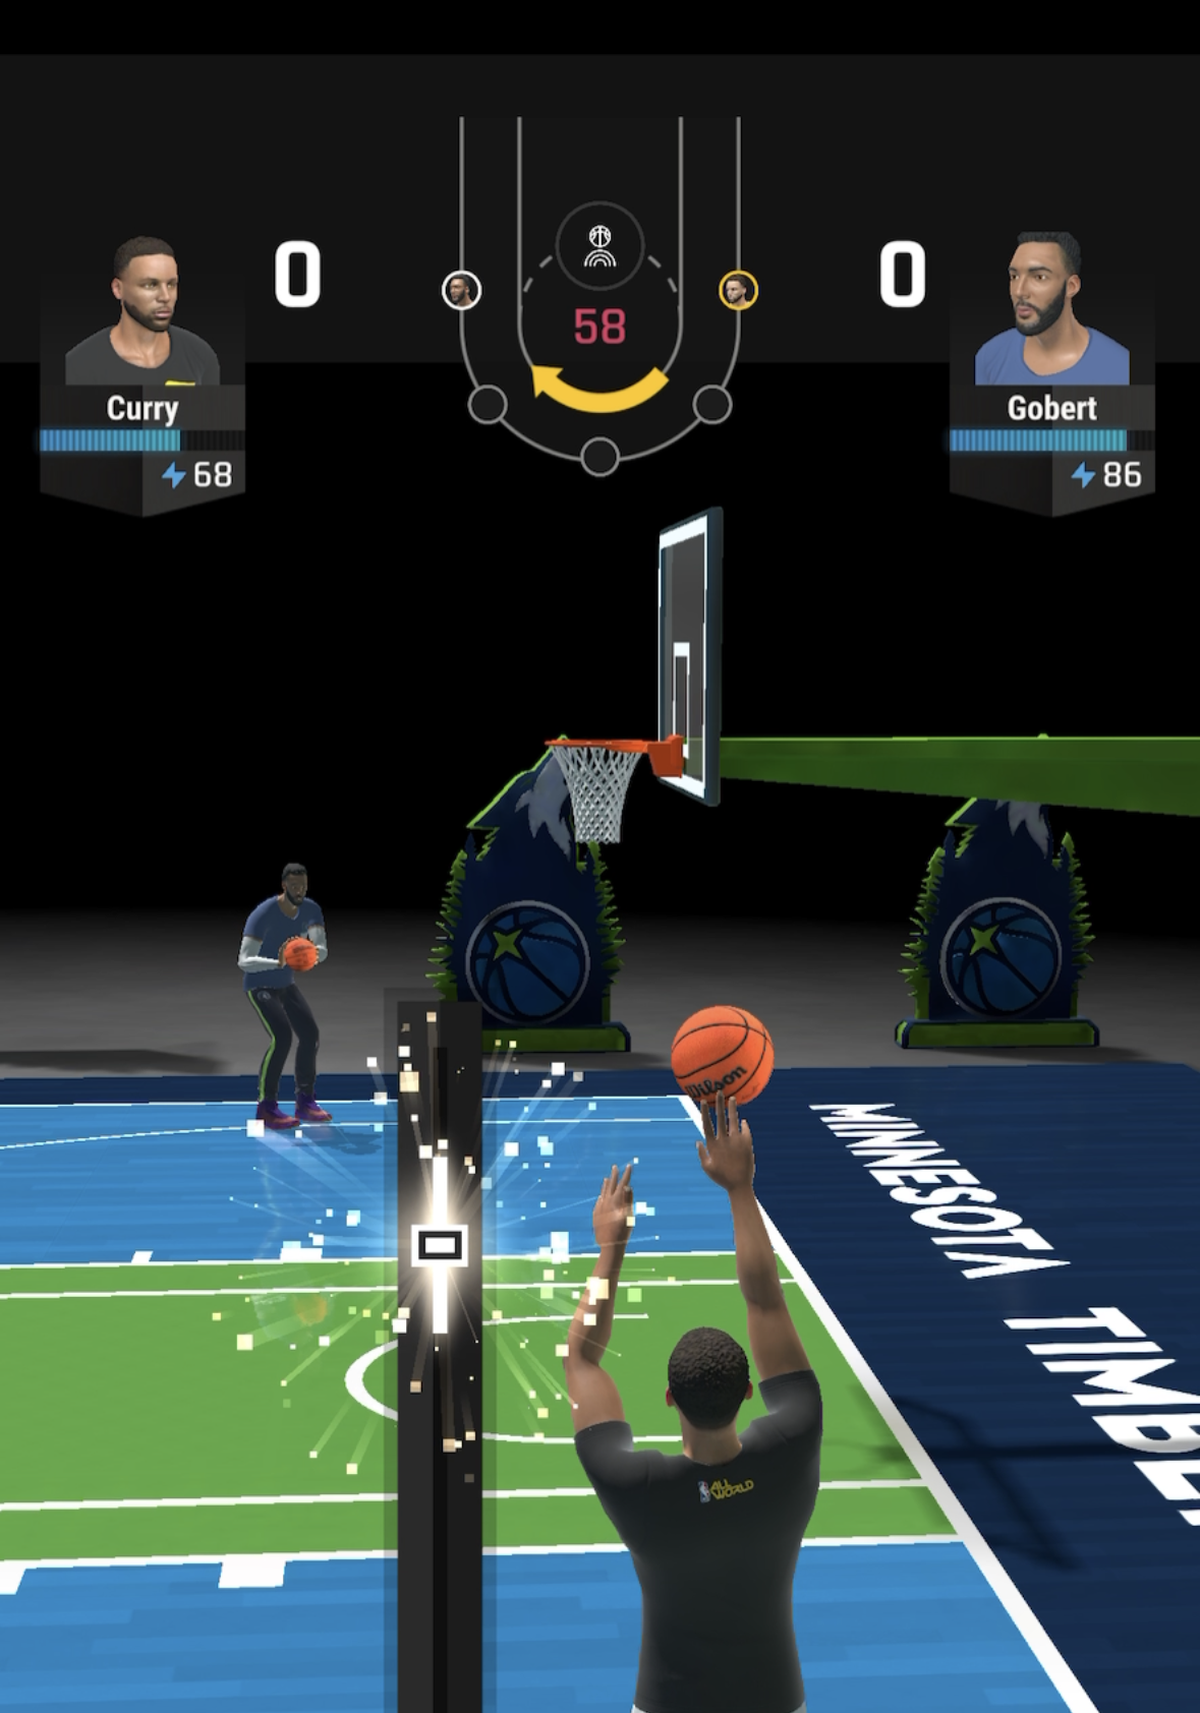 A screenshot of the NBA All-world game, which is available as free to play globally.